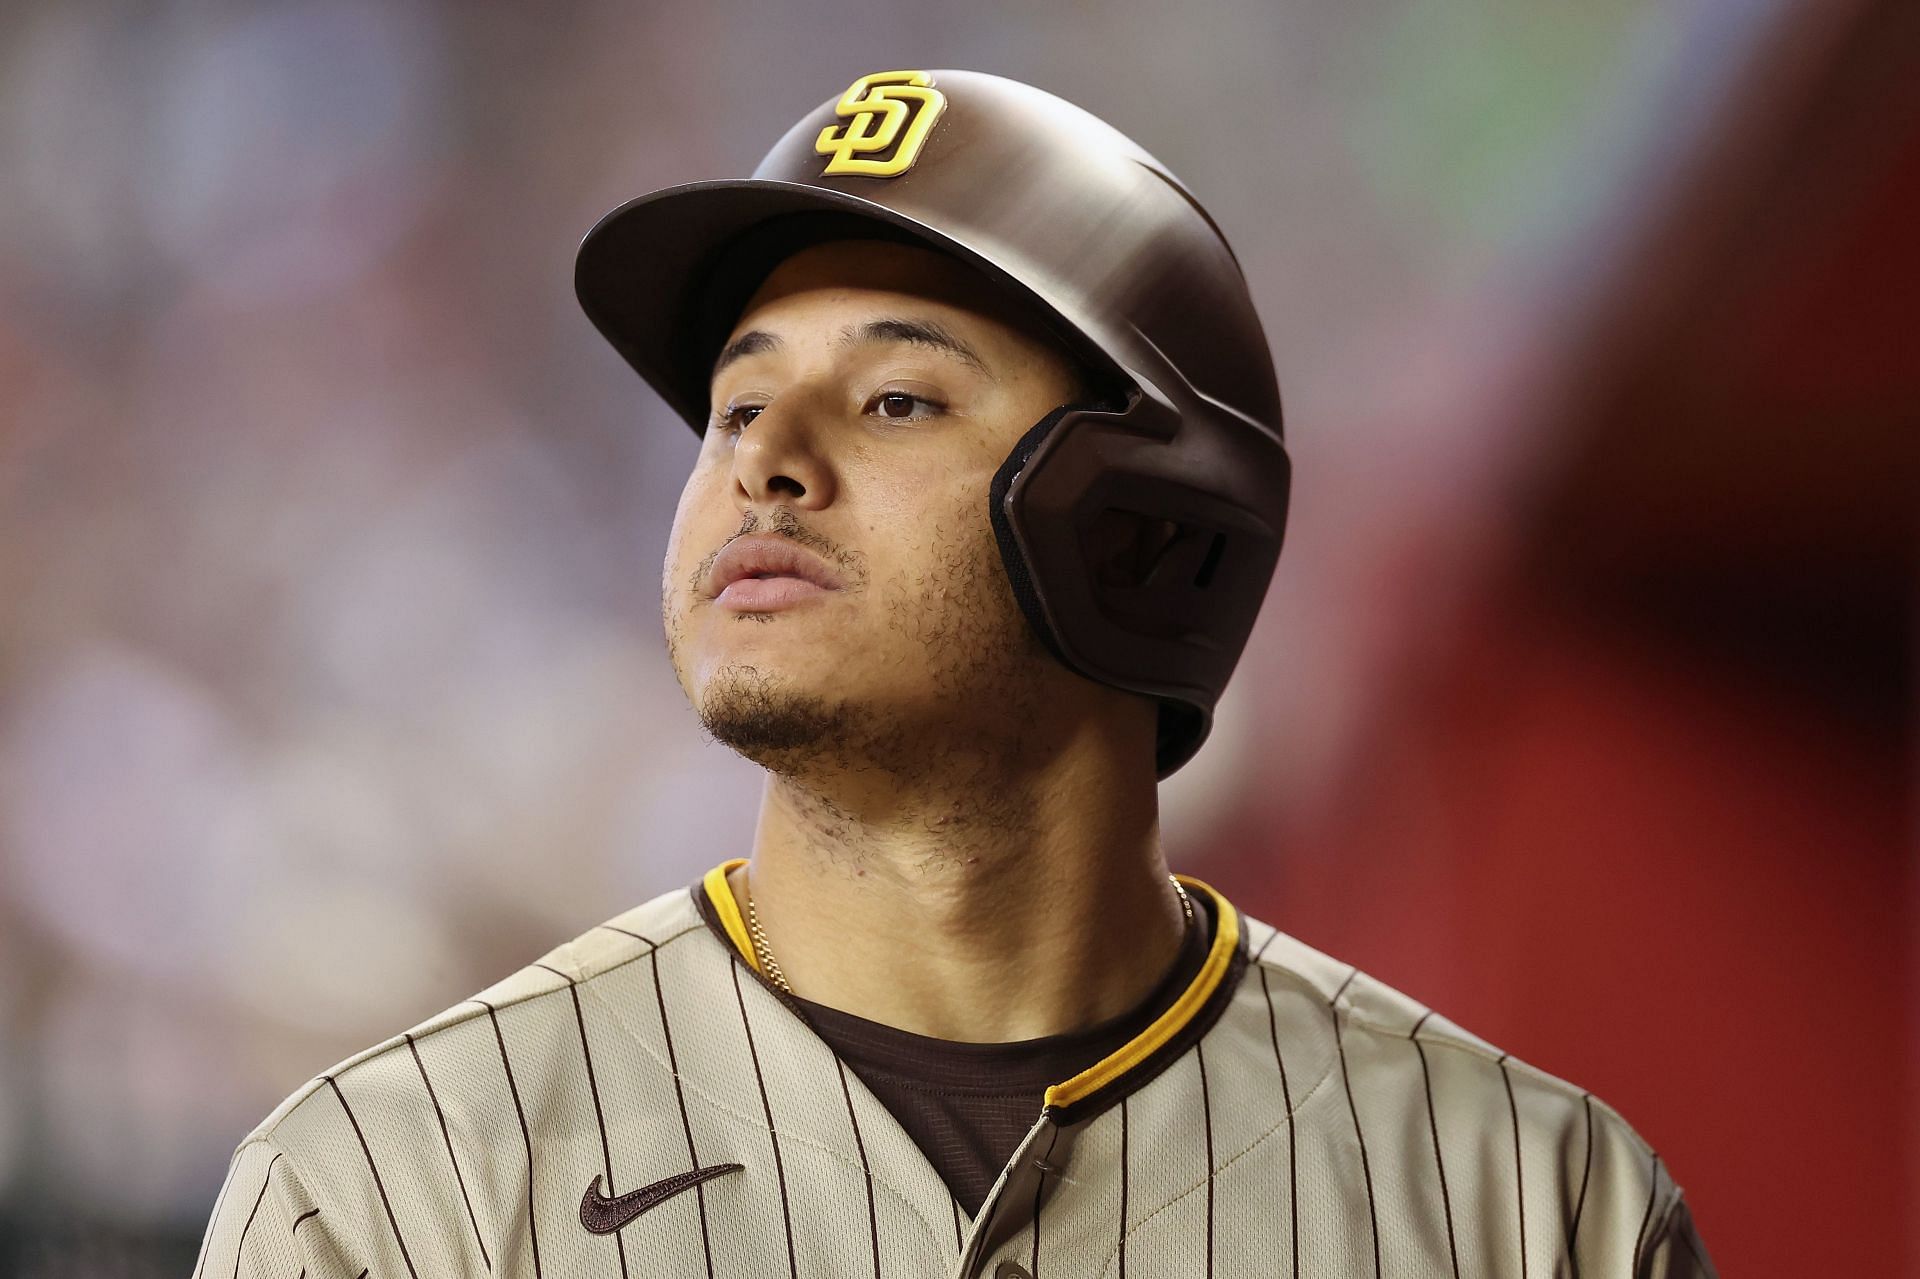 San Diego Padres fans relieved to see superstar Manny Machado bust out of his slump with home run: "Hey he learned how to hit"